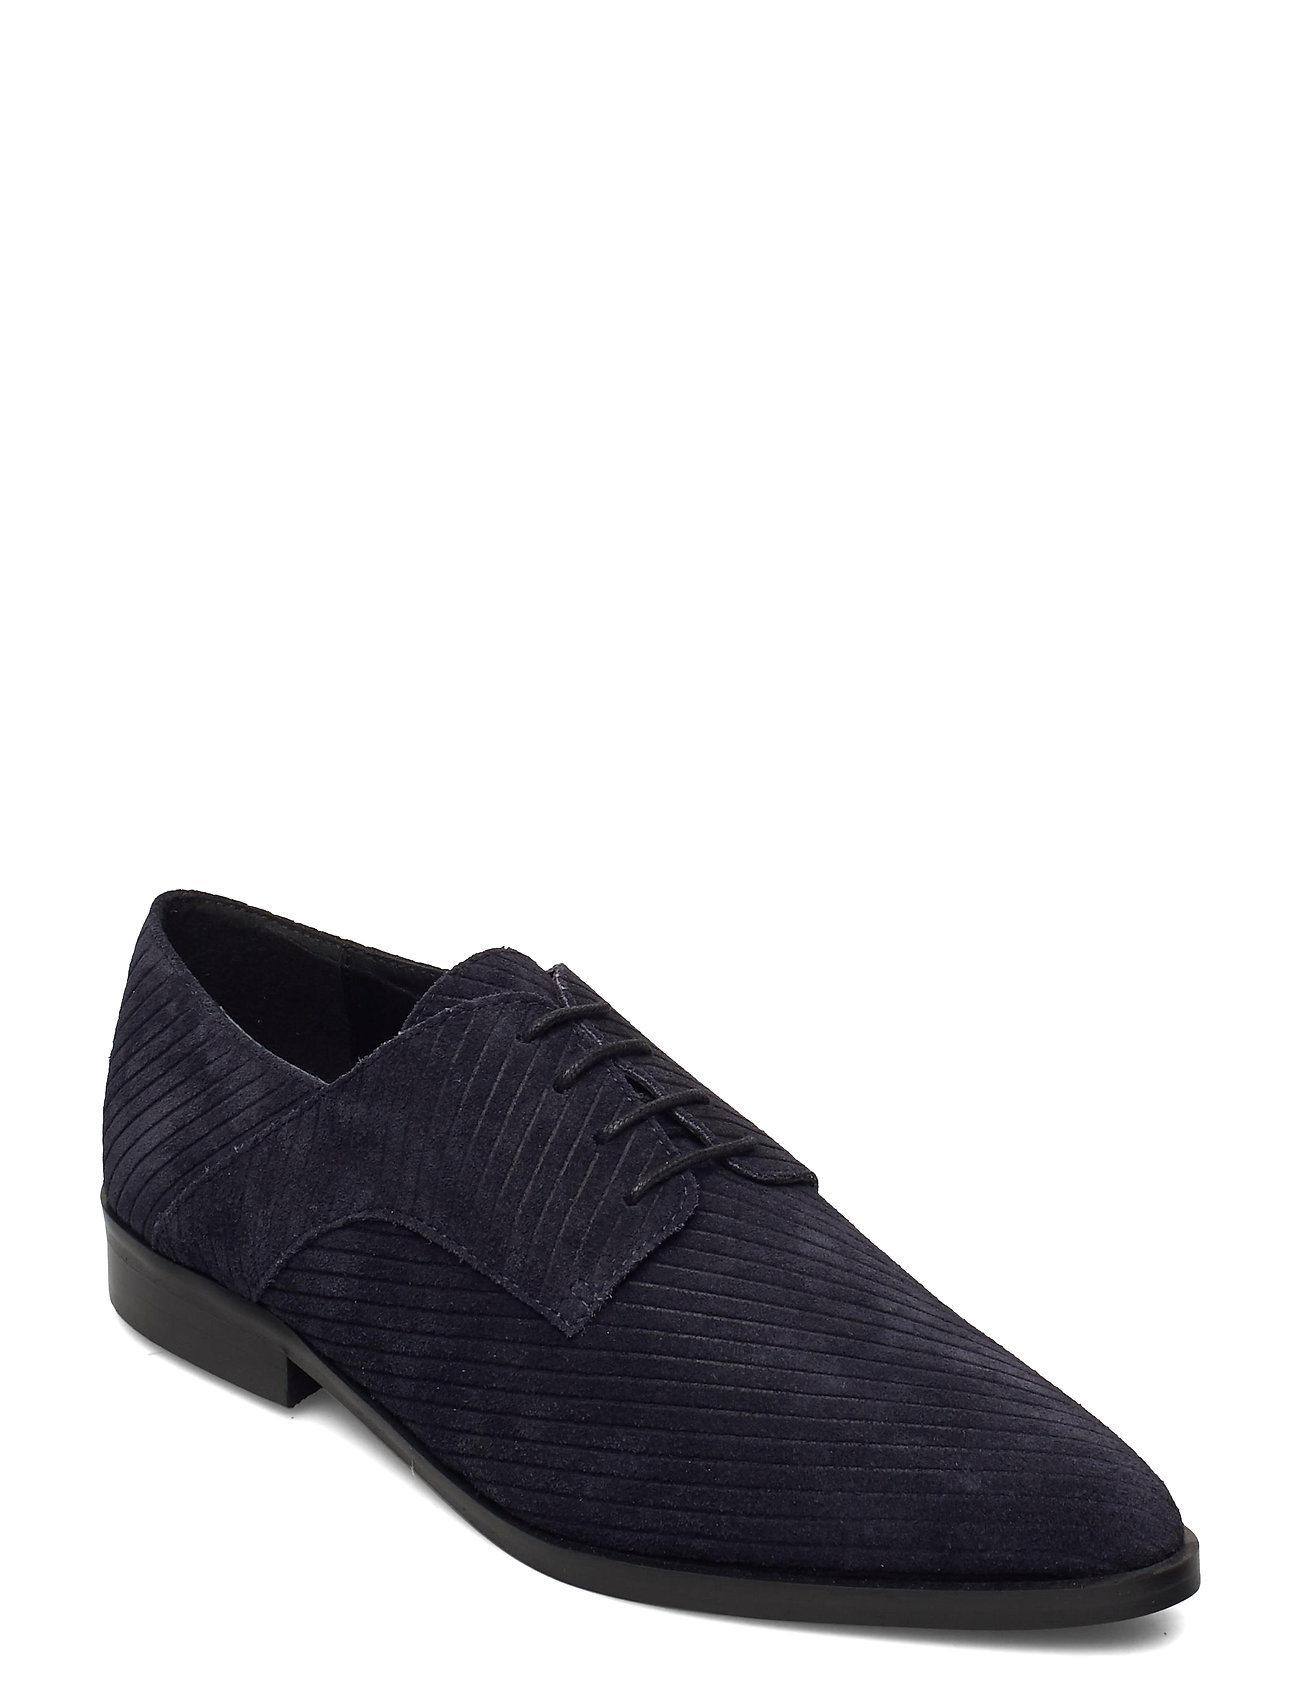 Suede Cord Derby shoes - Boozt.com